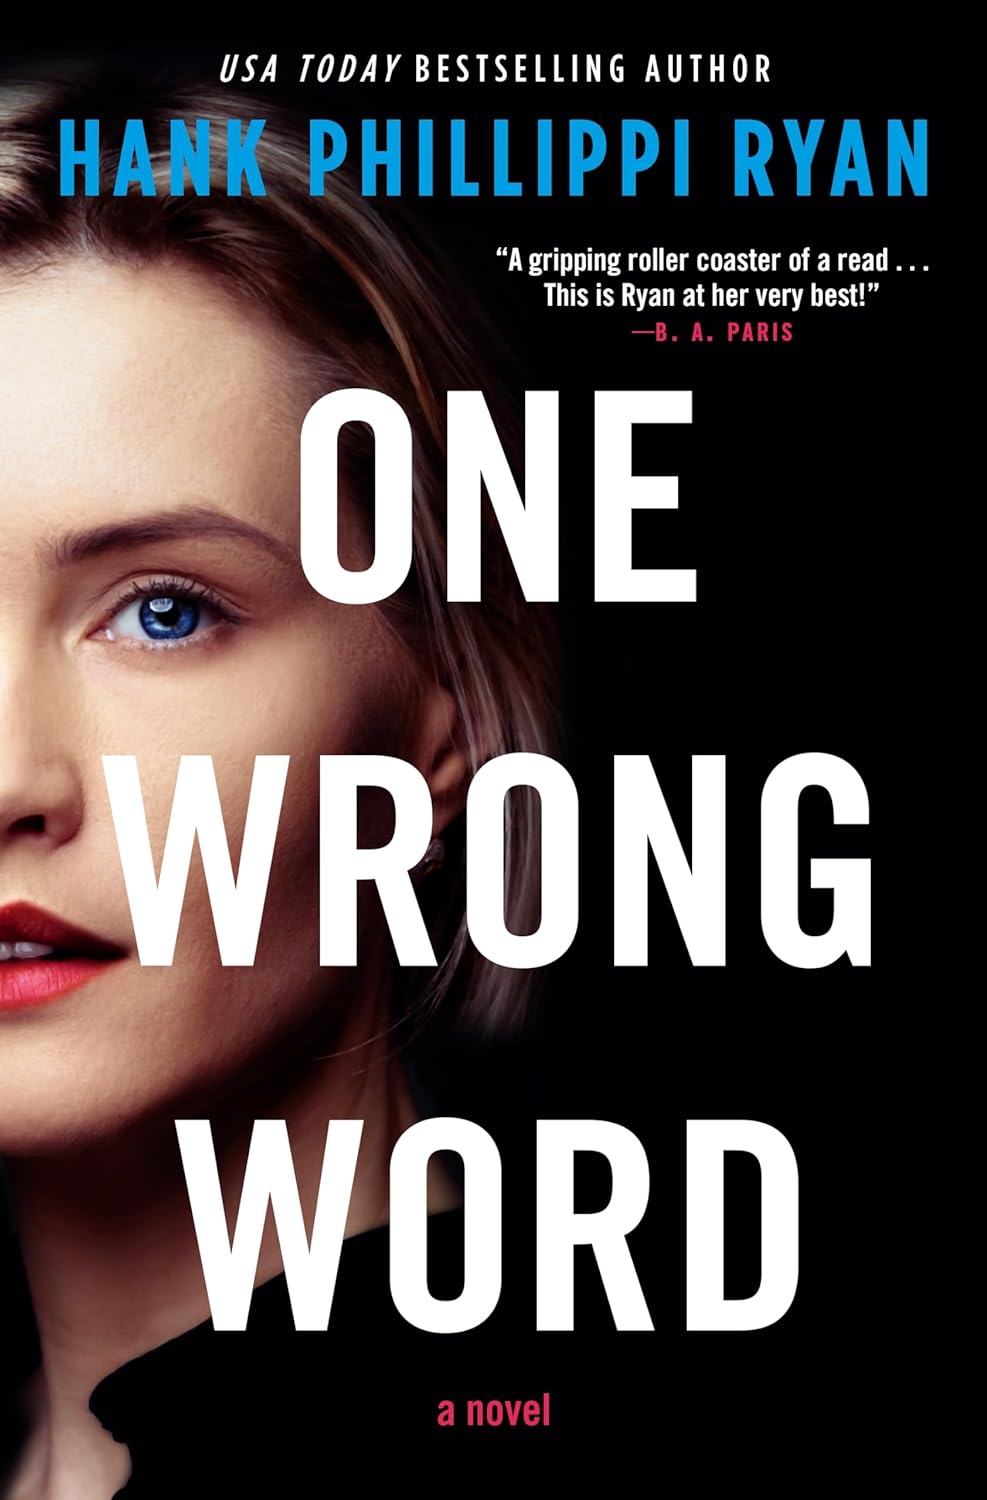 One Wrong Word by Hank Phillippi Ryan